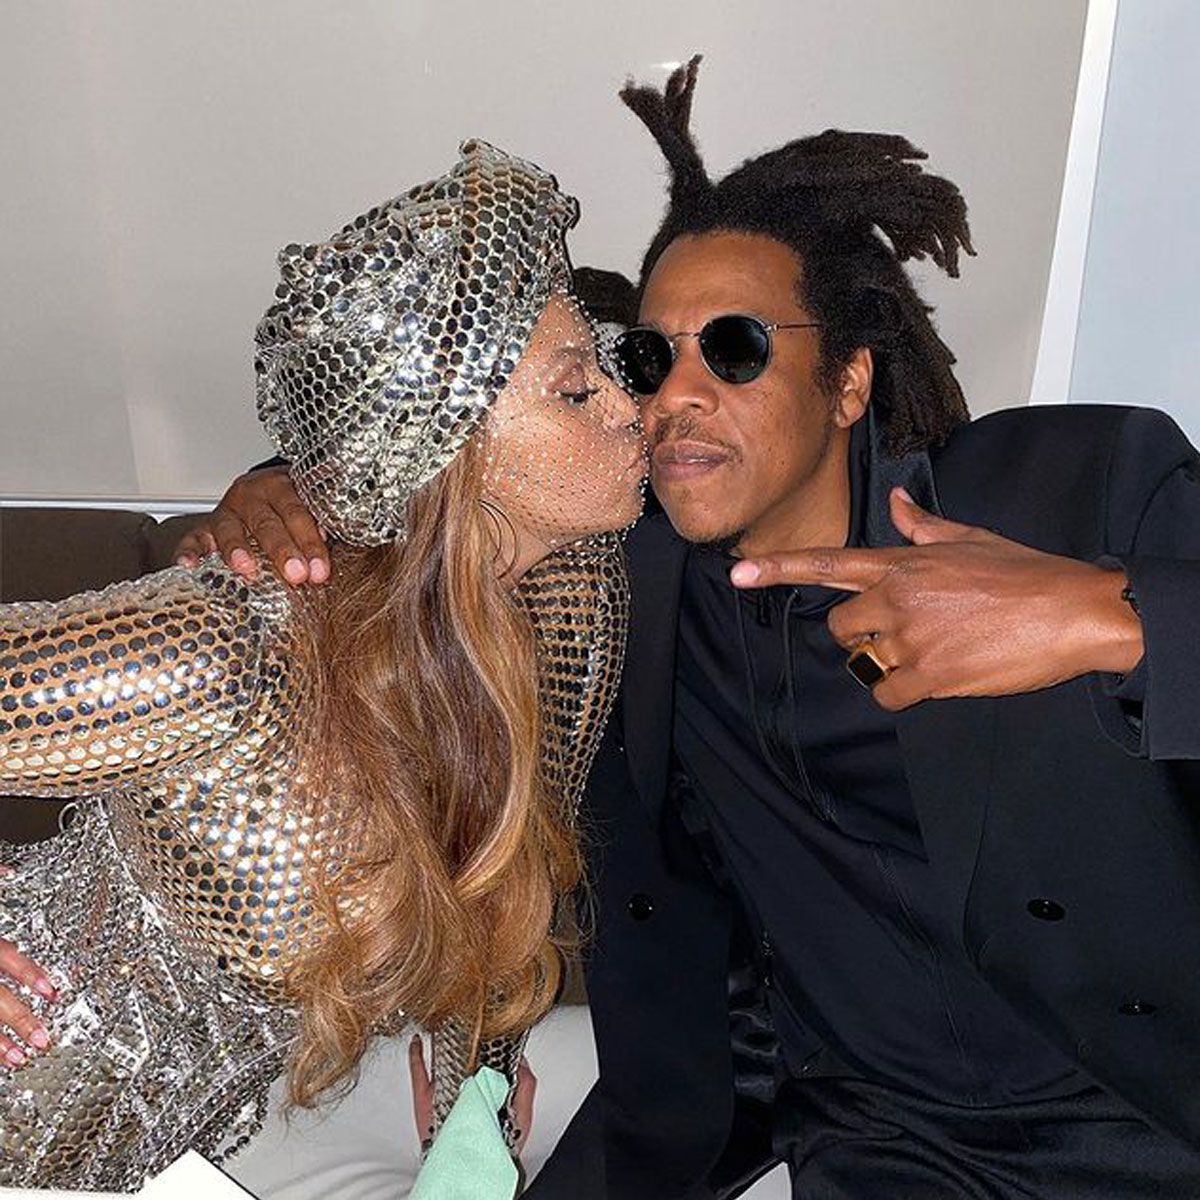 Beyoncé and JayZ Prove They're Still Crazy in Love in PDA Photos E